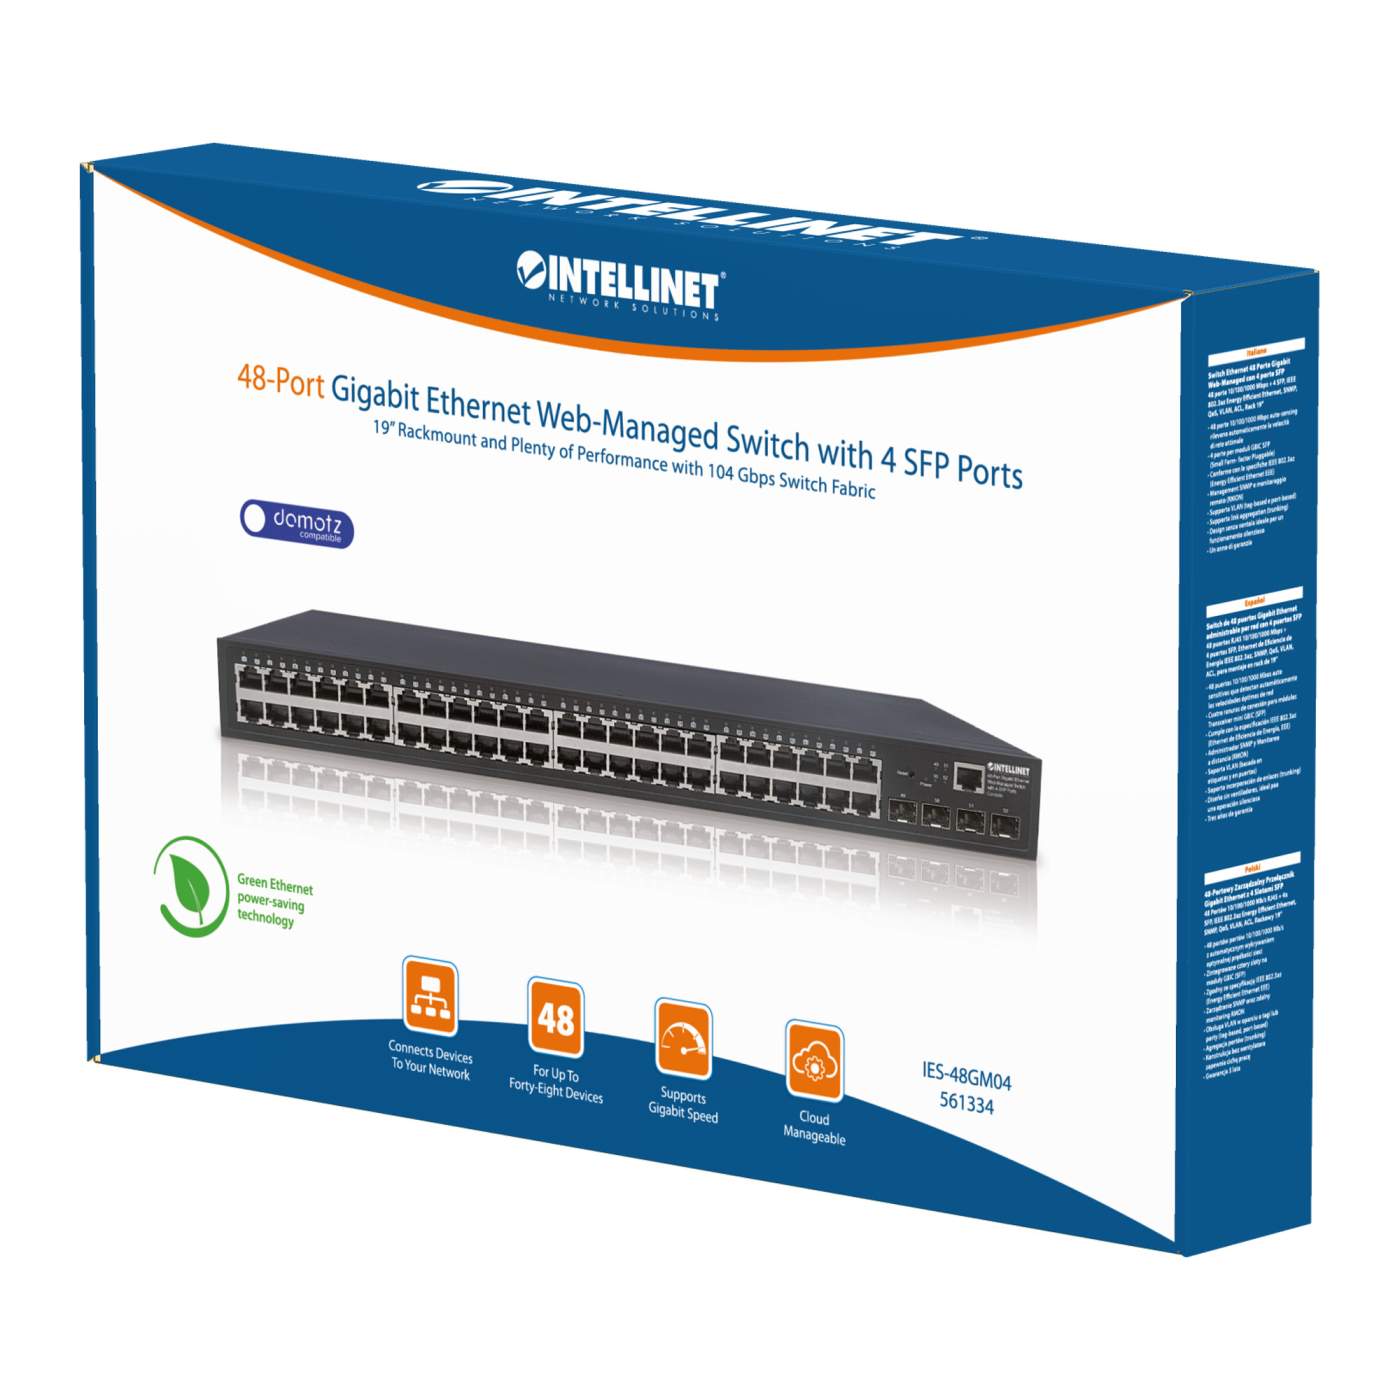 48-Port Gigabit Ethernet Web-Managed Switch with 4 SFP Ports Packaging Image 2